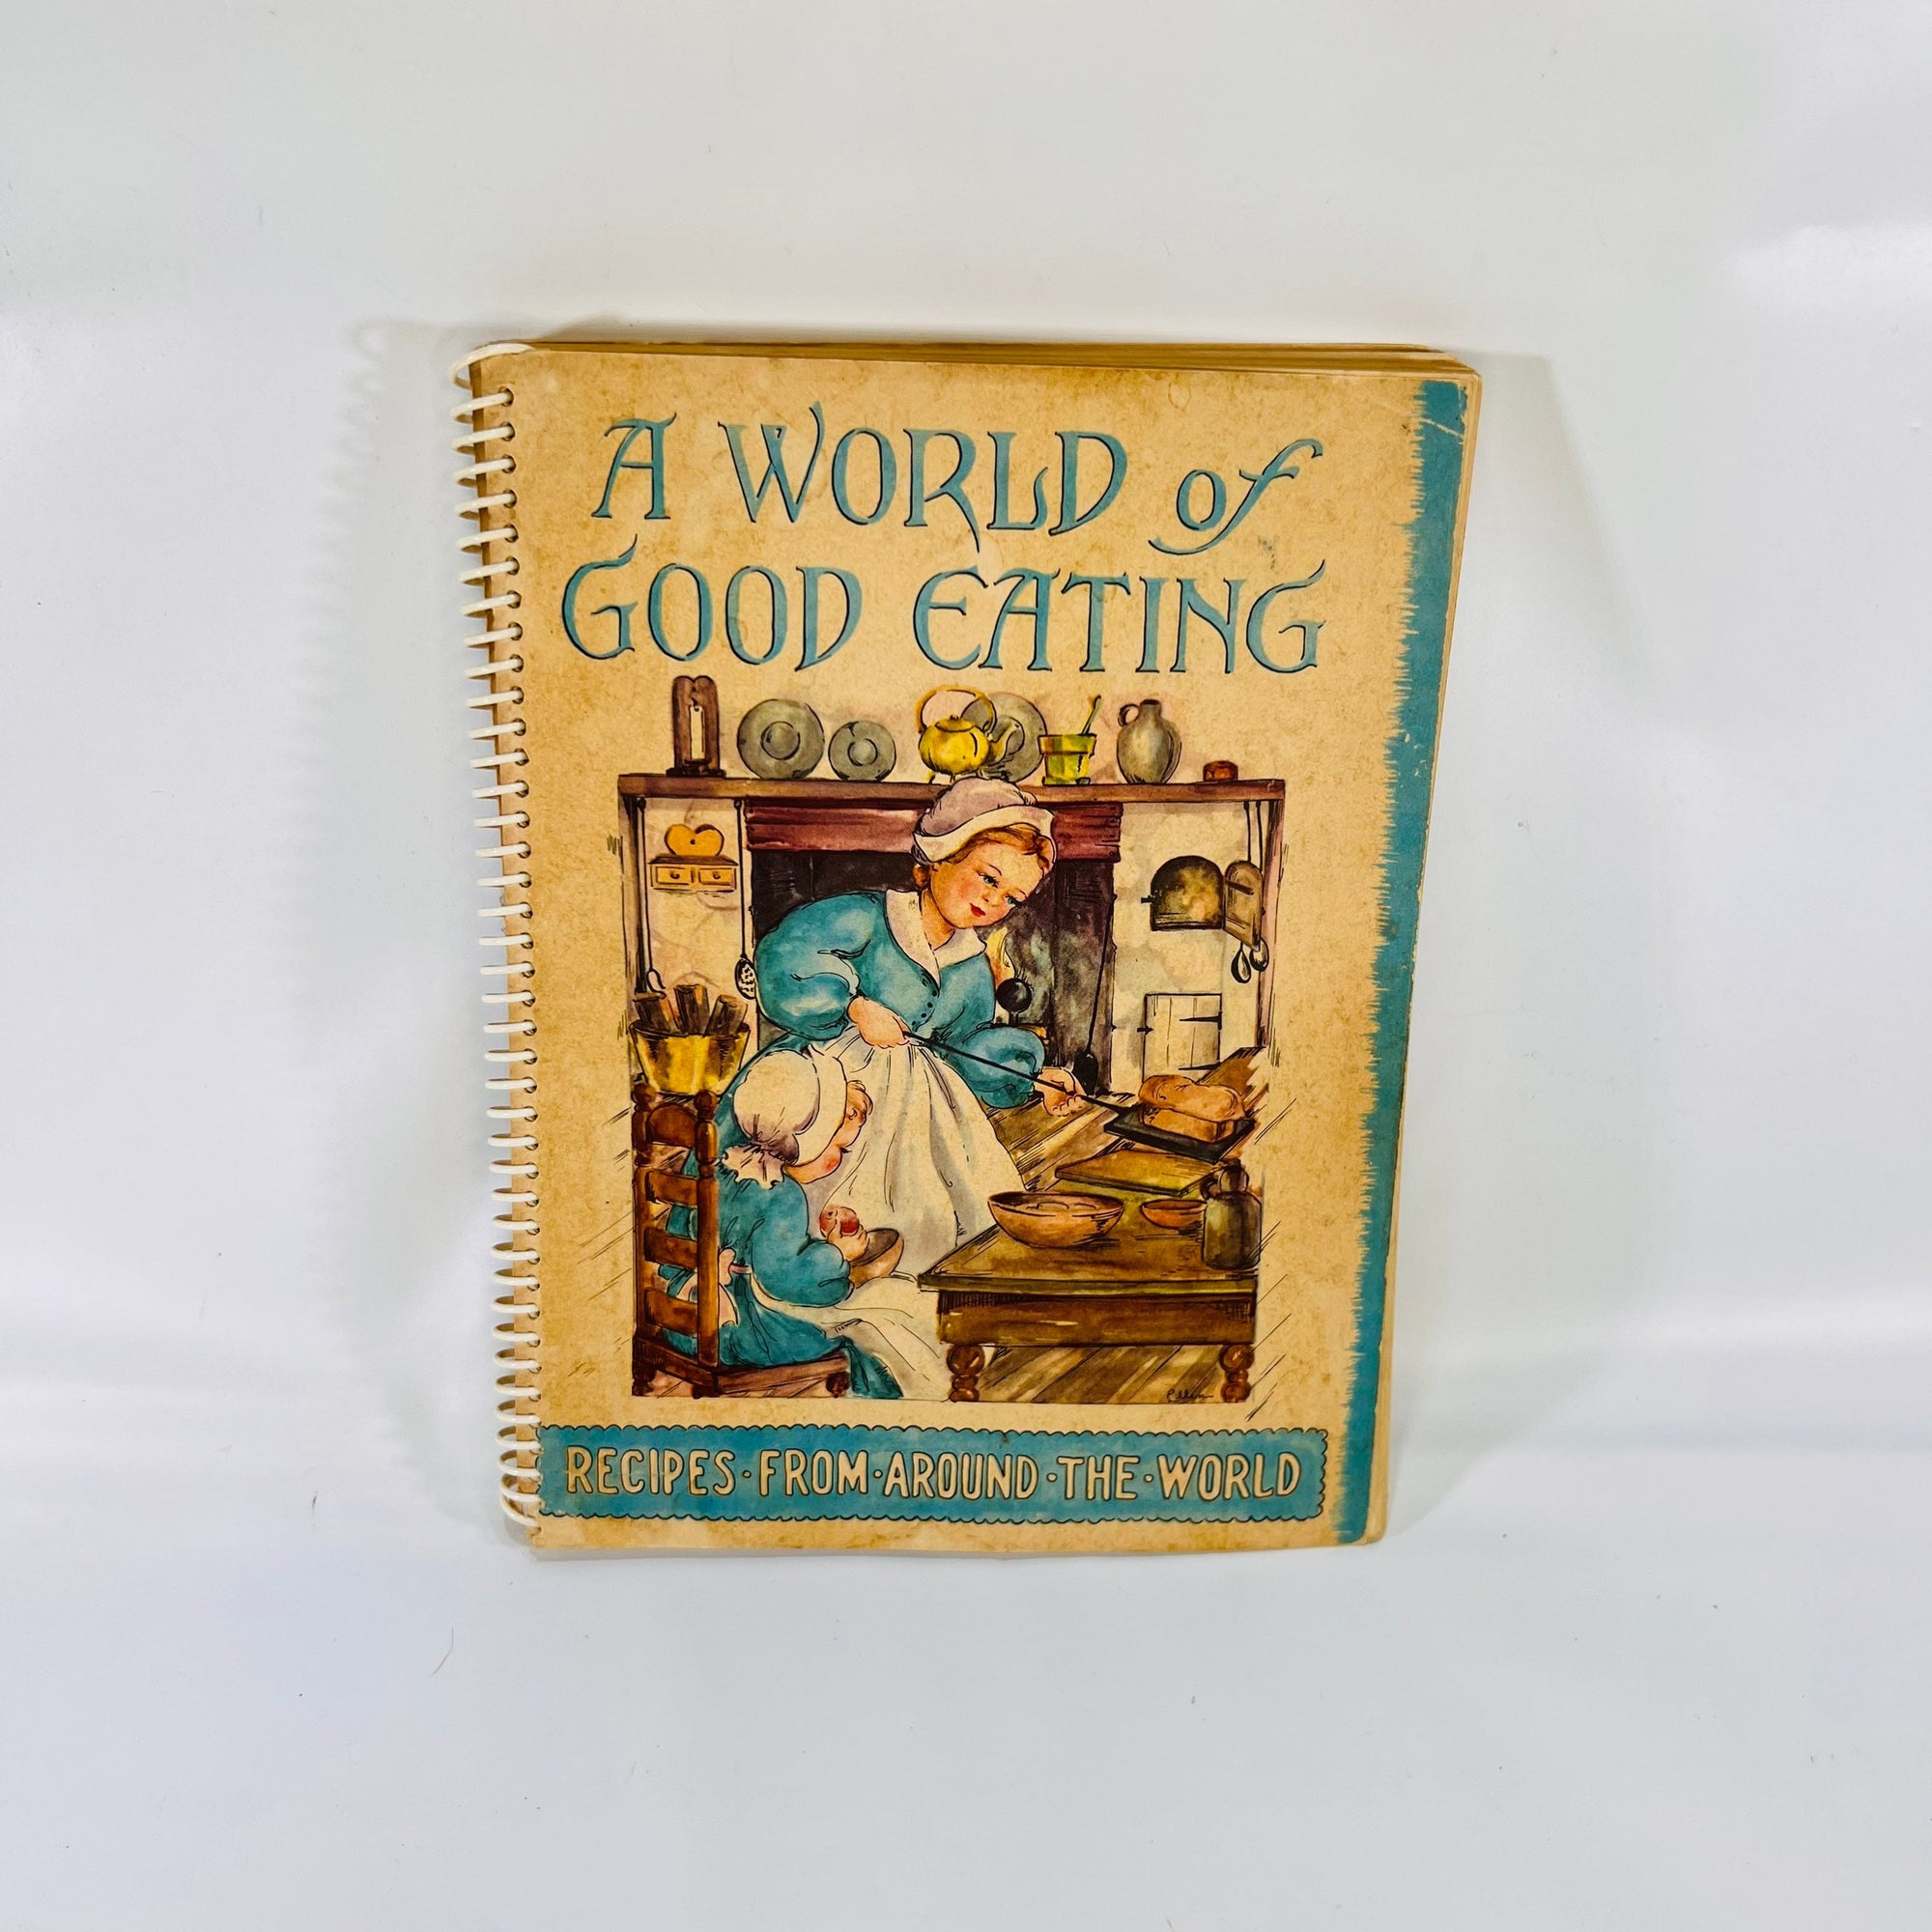 A World of Good Eating Recipes from Around the World  by Heloise Frost 1951 Philips Publishers Tested in Kitchens of a New England Housewife